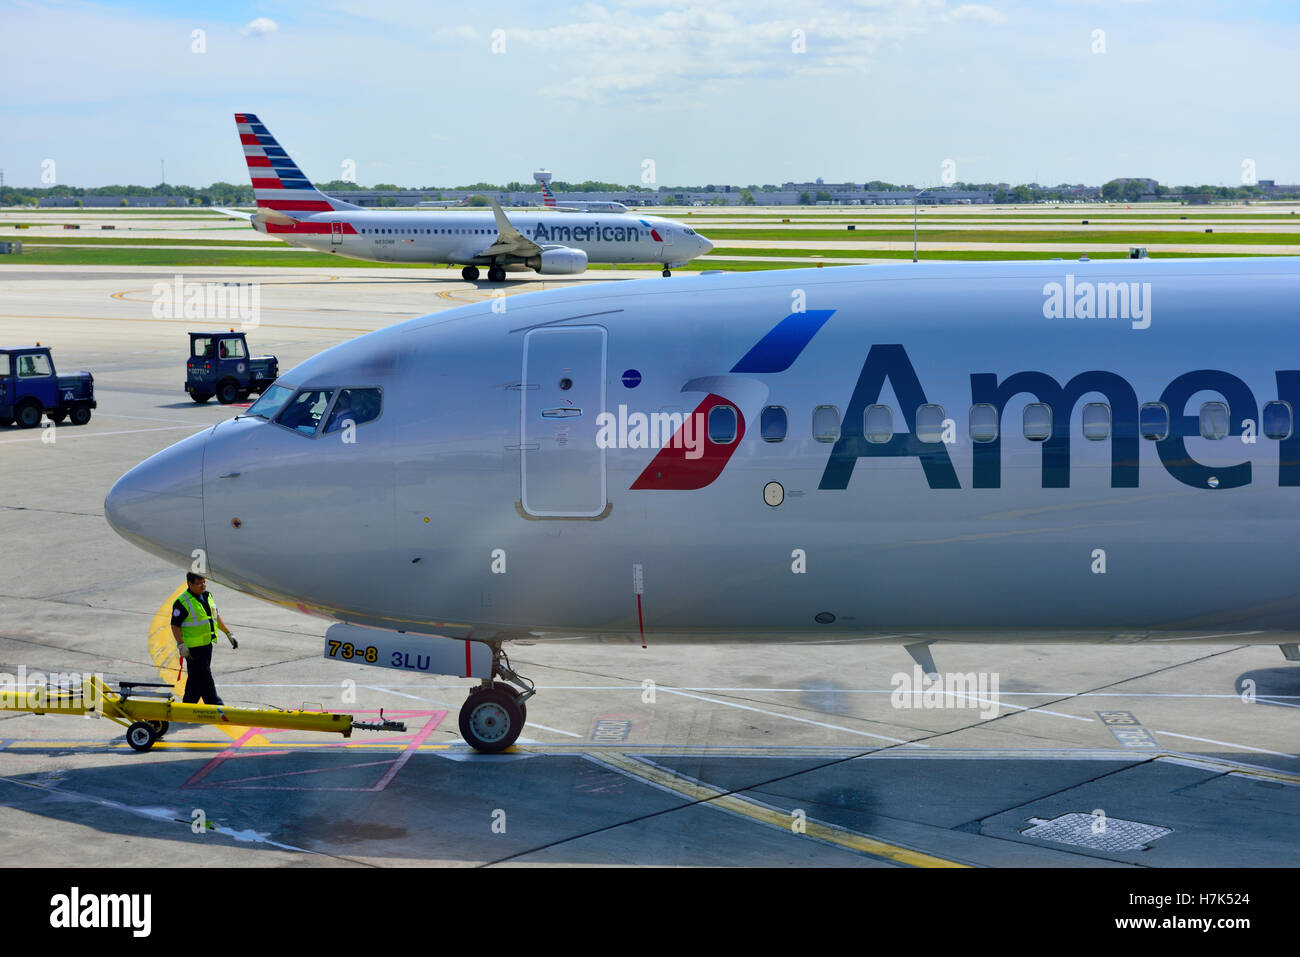 American Airlines plains at Chicago O'Hare International Airport, USA Stock Photo